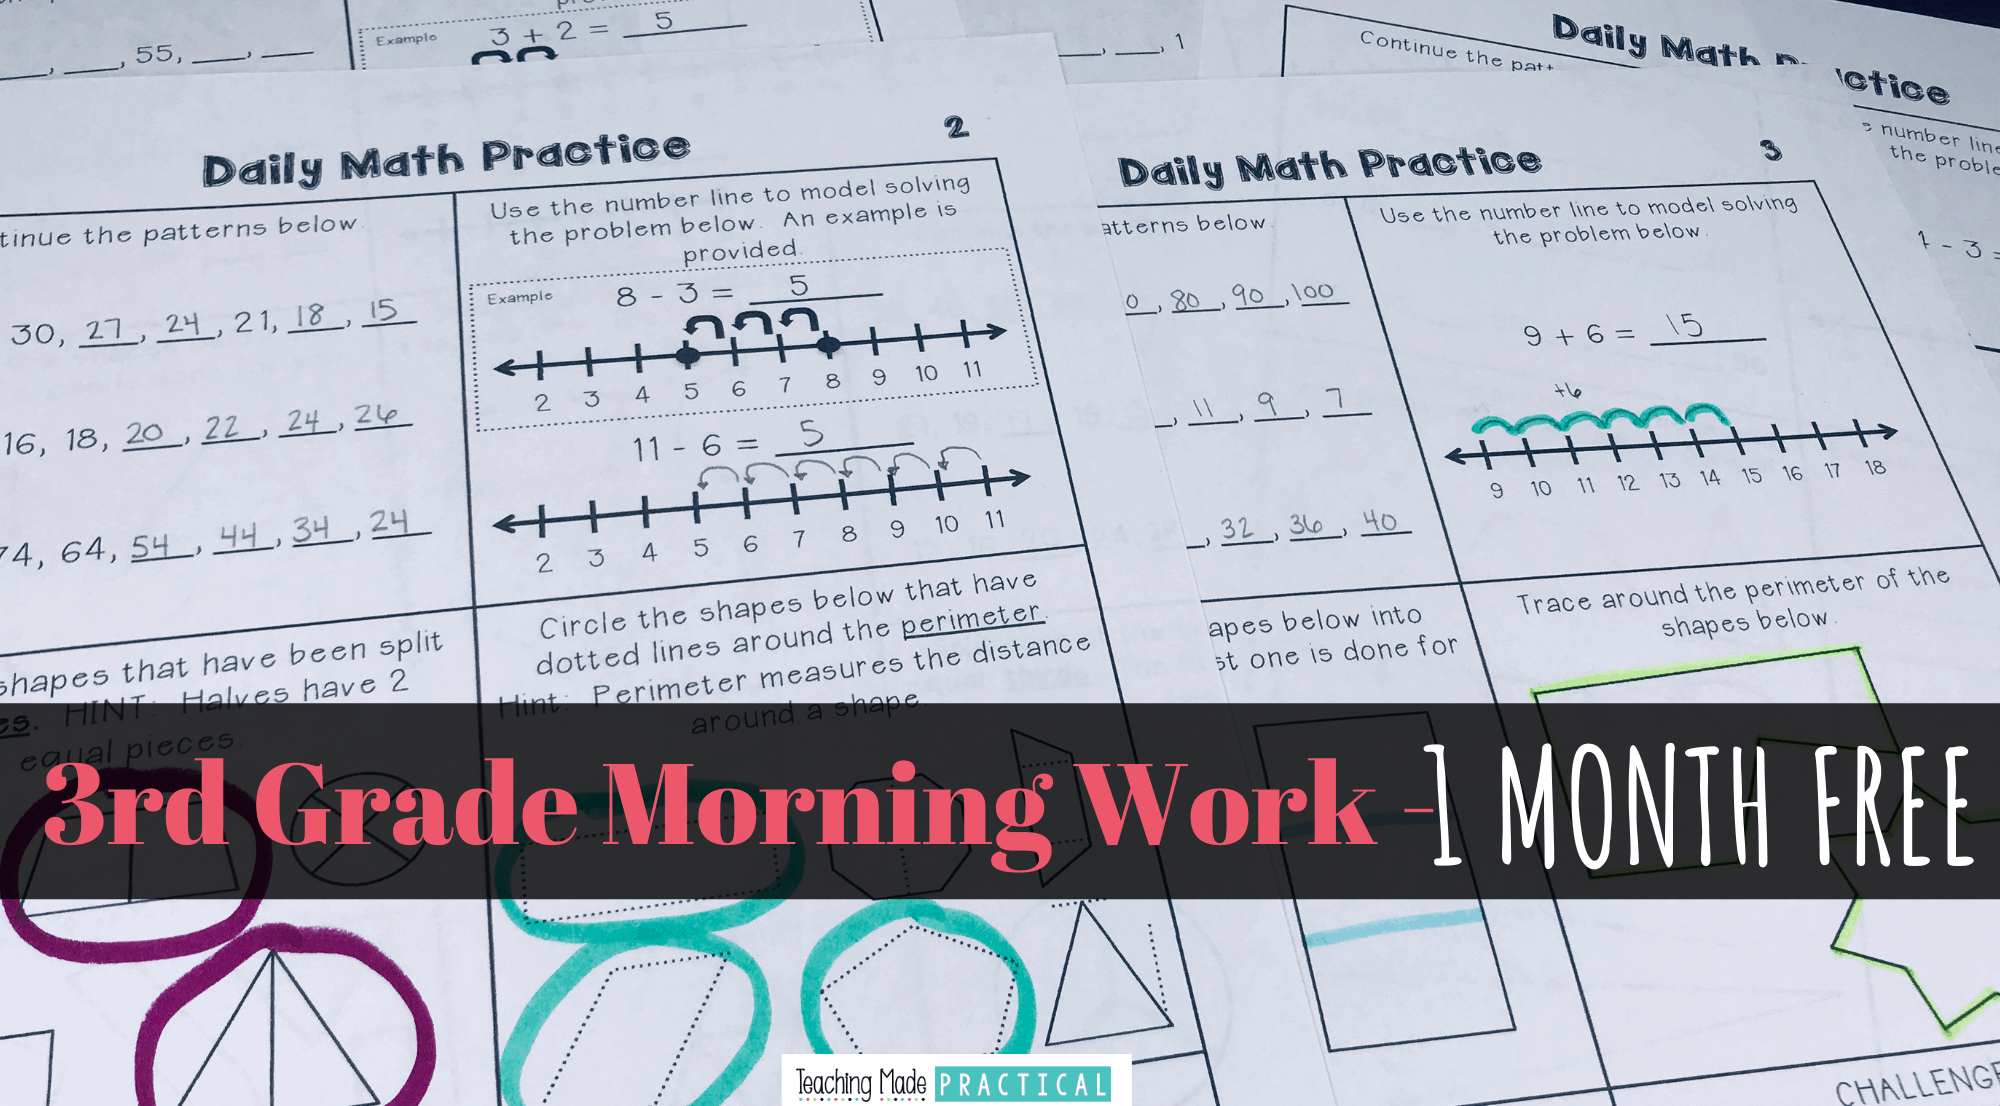 Get one week of 3rd grade math morning work free - covers 5 different math domains and provides scaffolded daily math practice